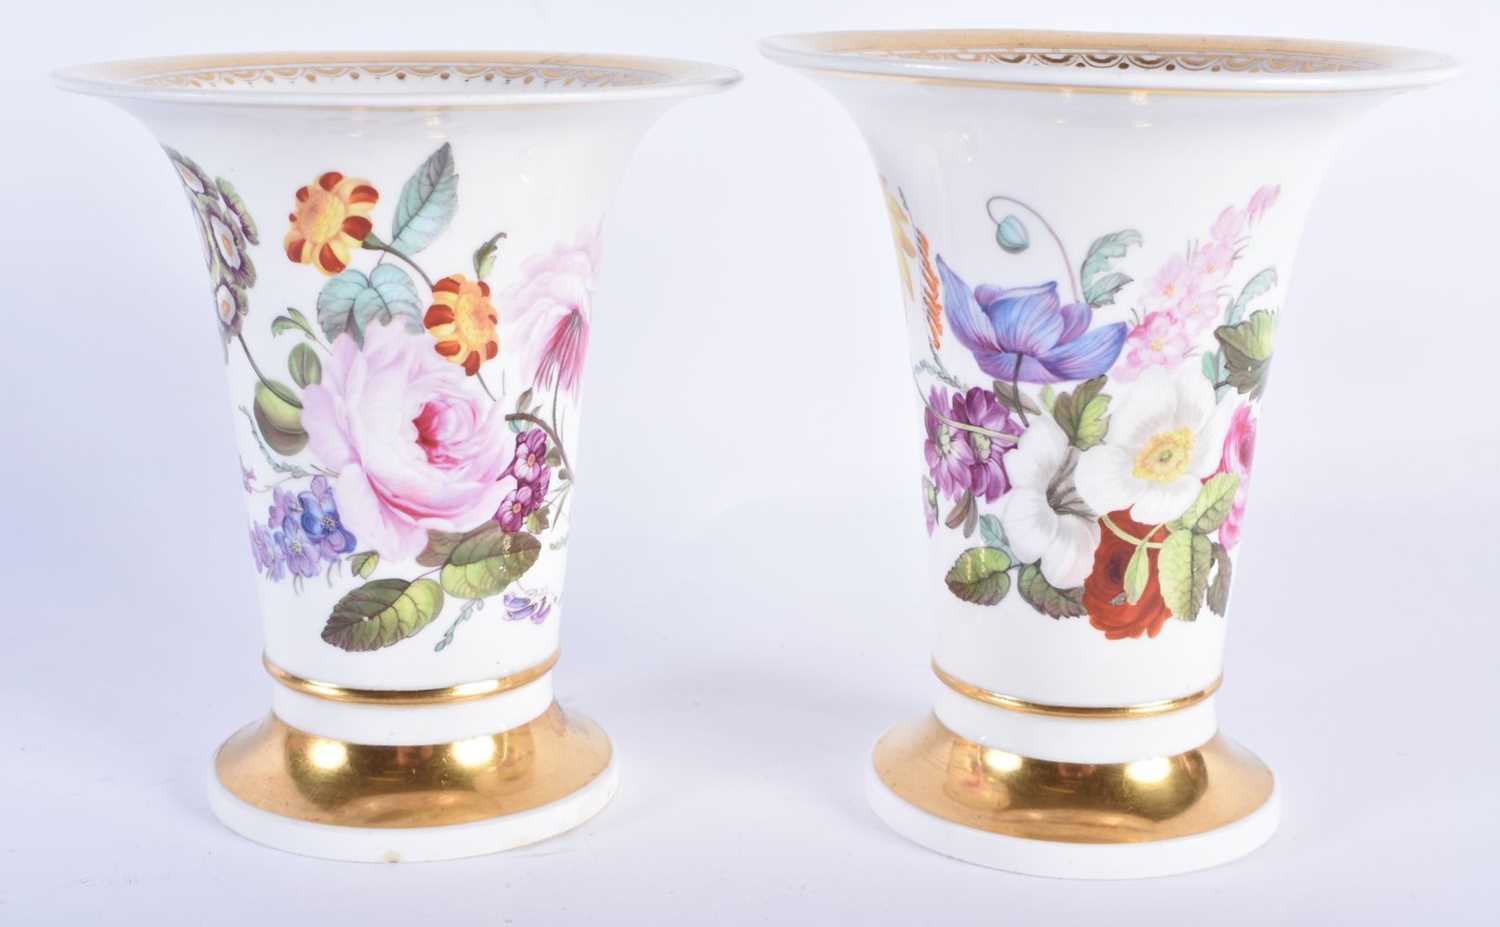 A PAIR OF EARLY 19TH CENTURY DERBY PORCELAIN VASES painted with flowers. 13 cm x 9 cm.